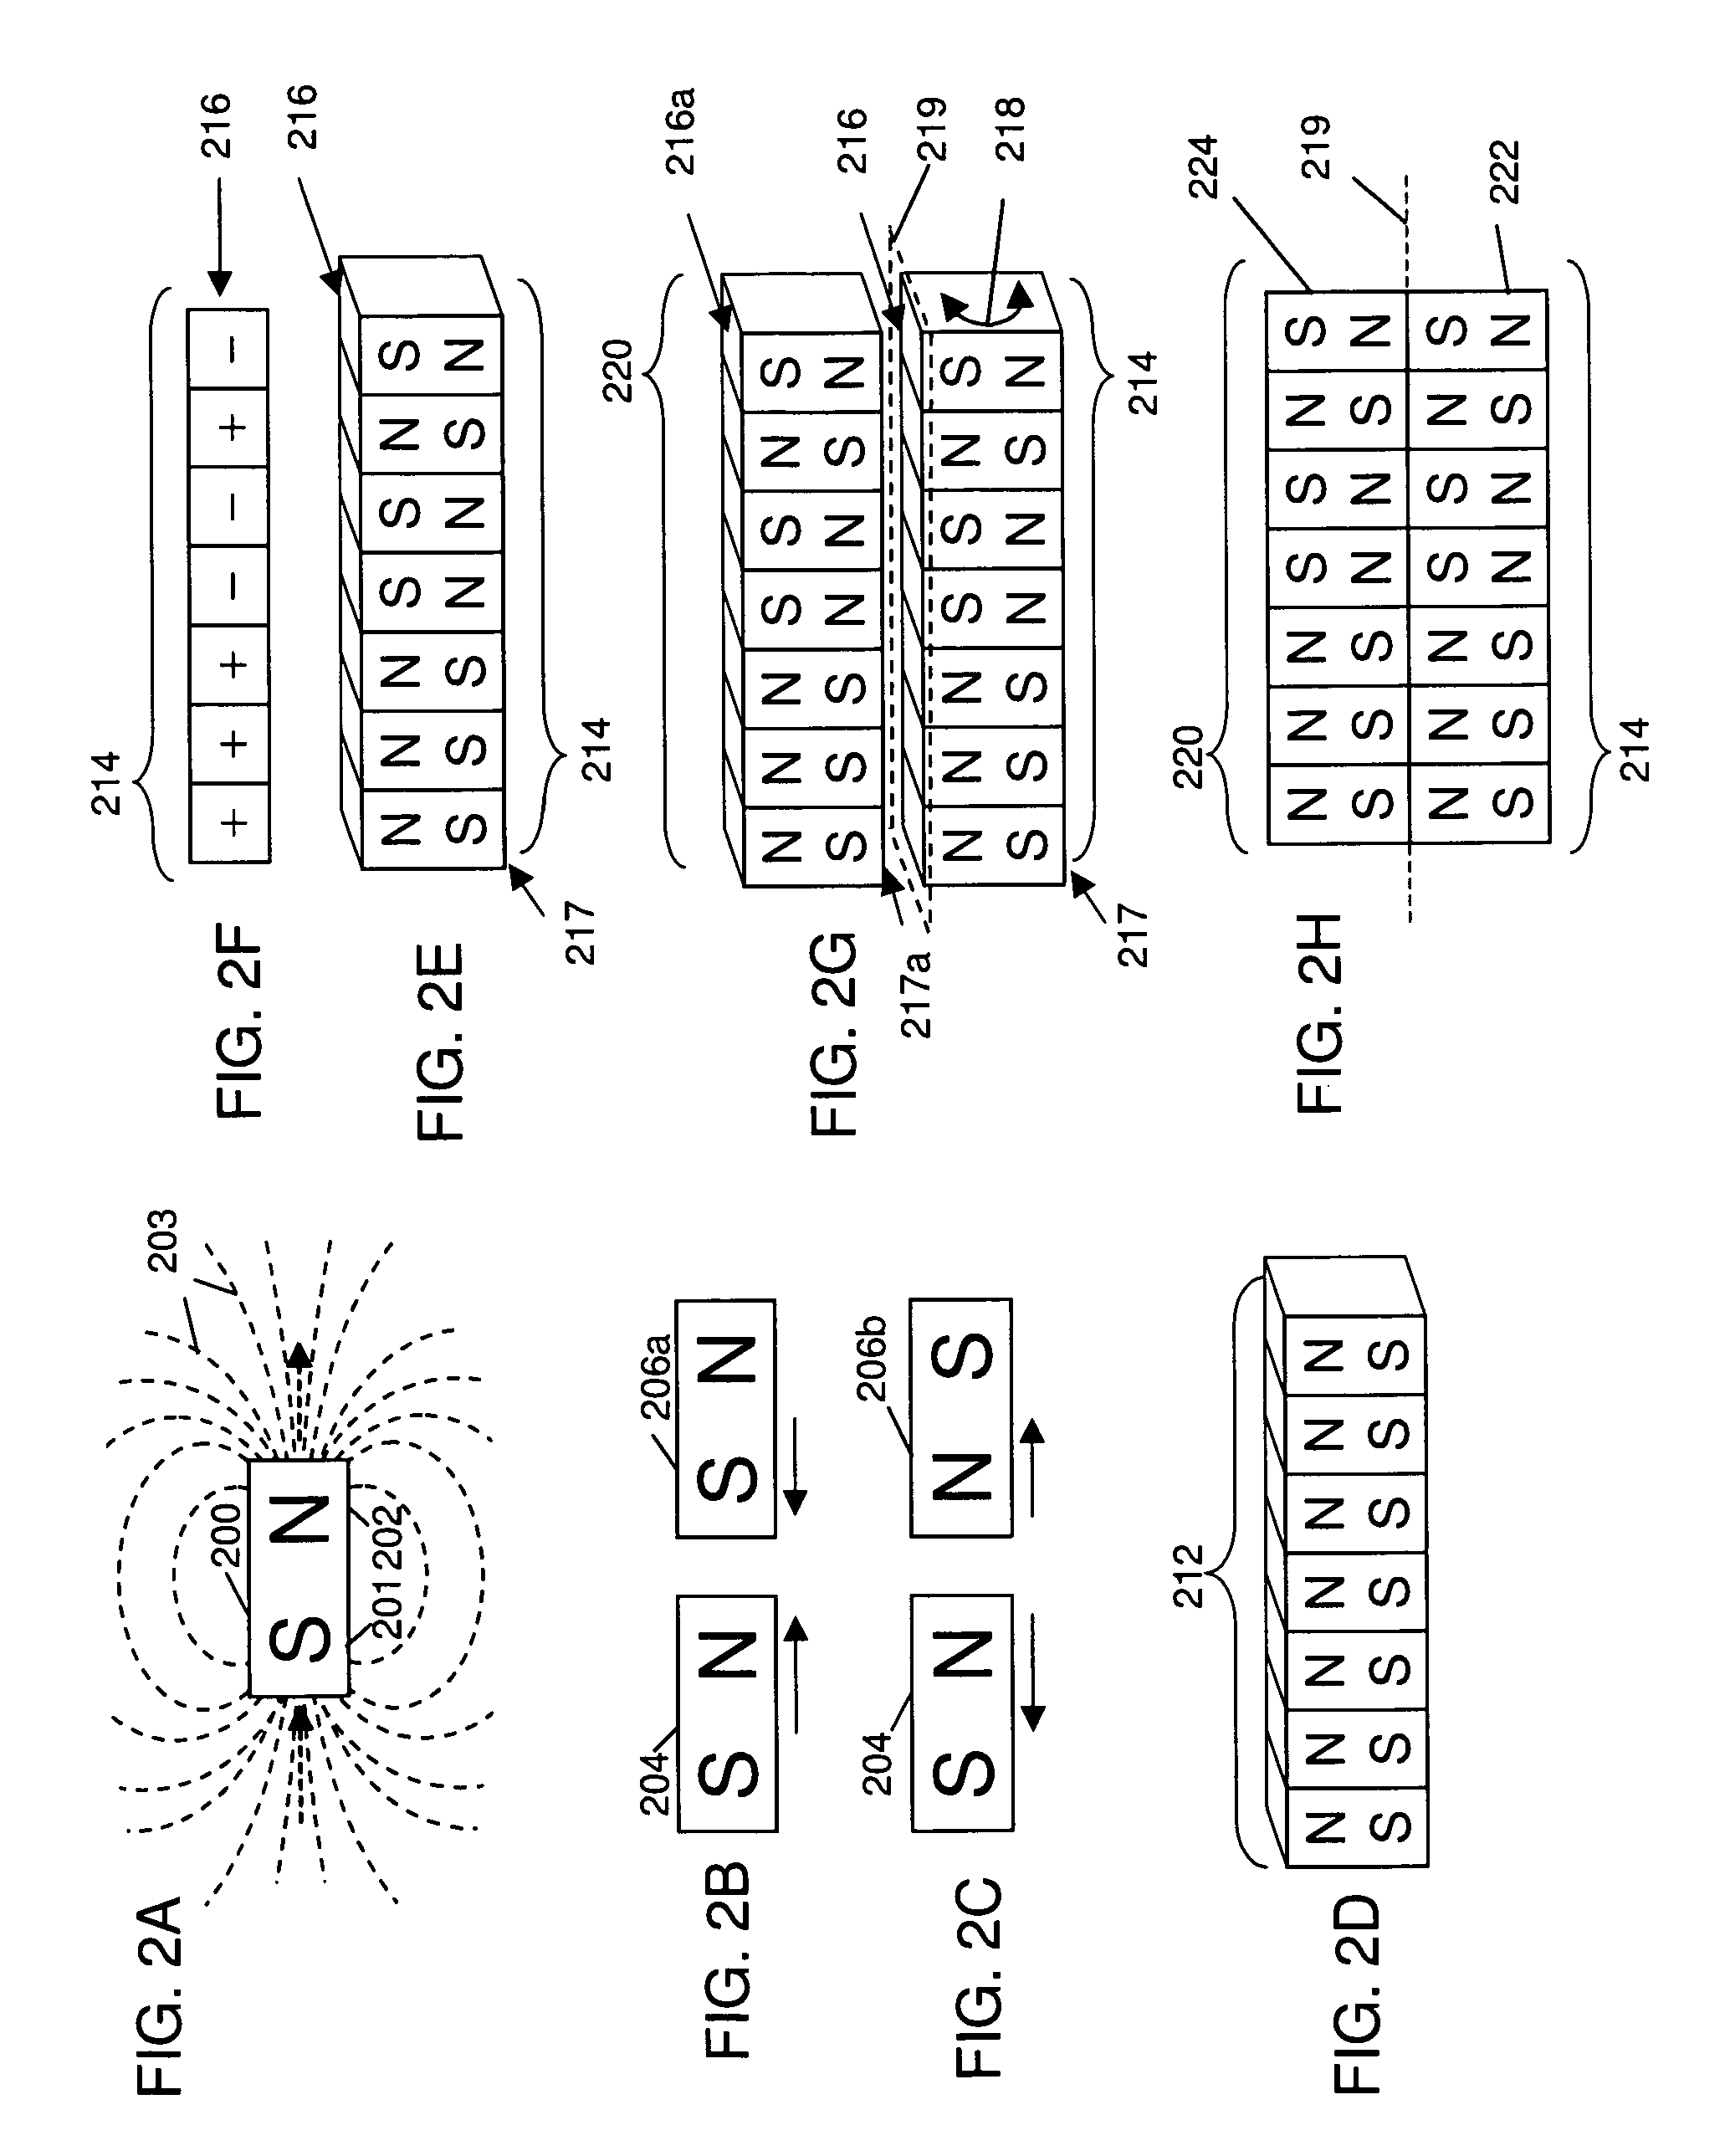 Coded magnet structures for selective association of articles